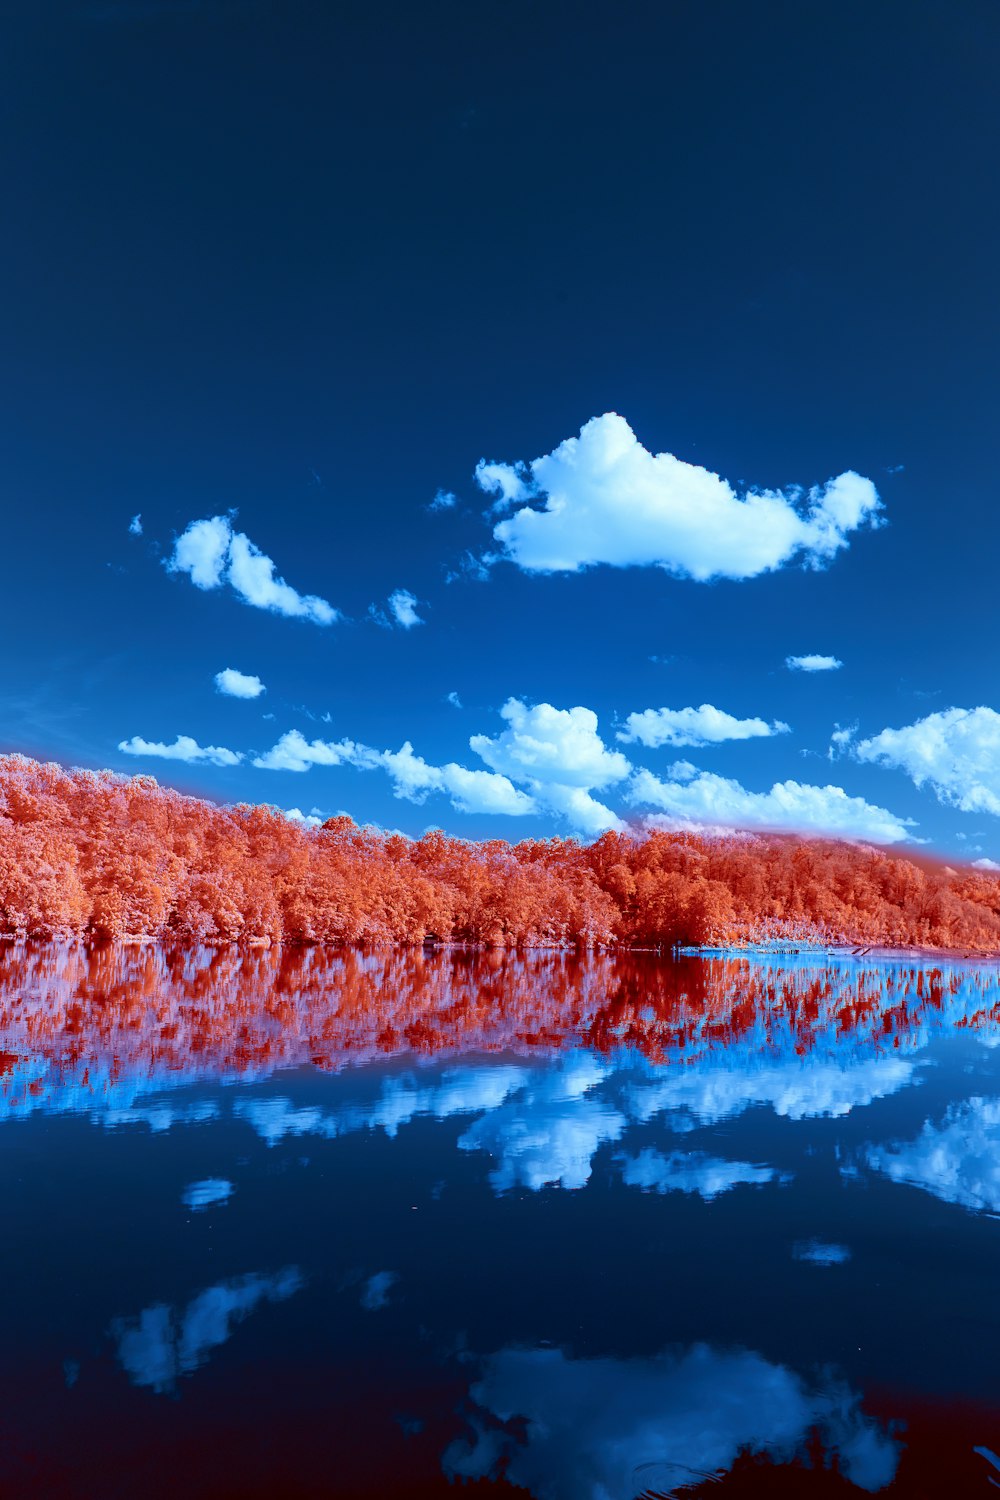 a body of water surrounded by trees and clouds